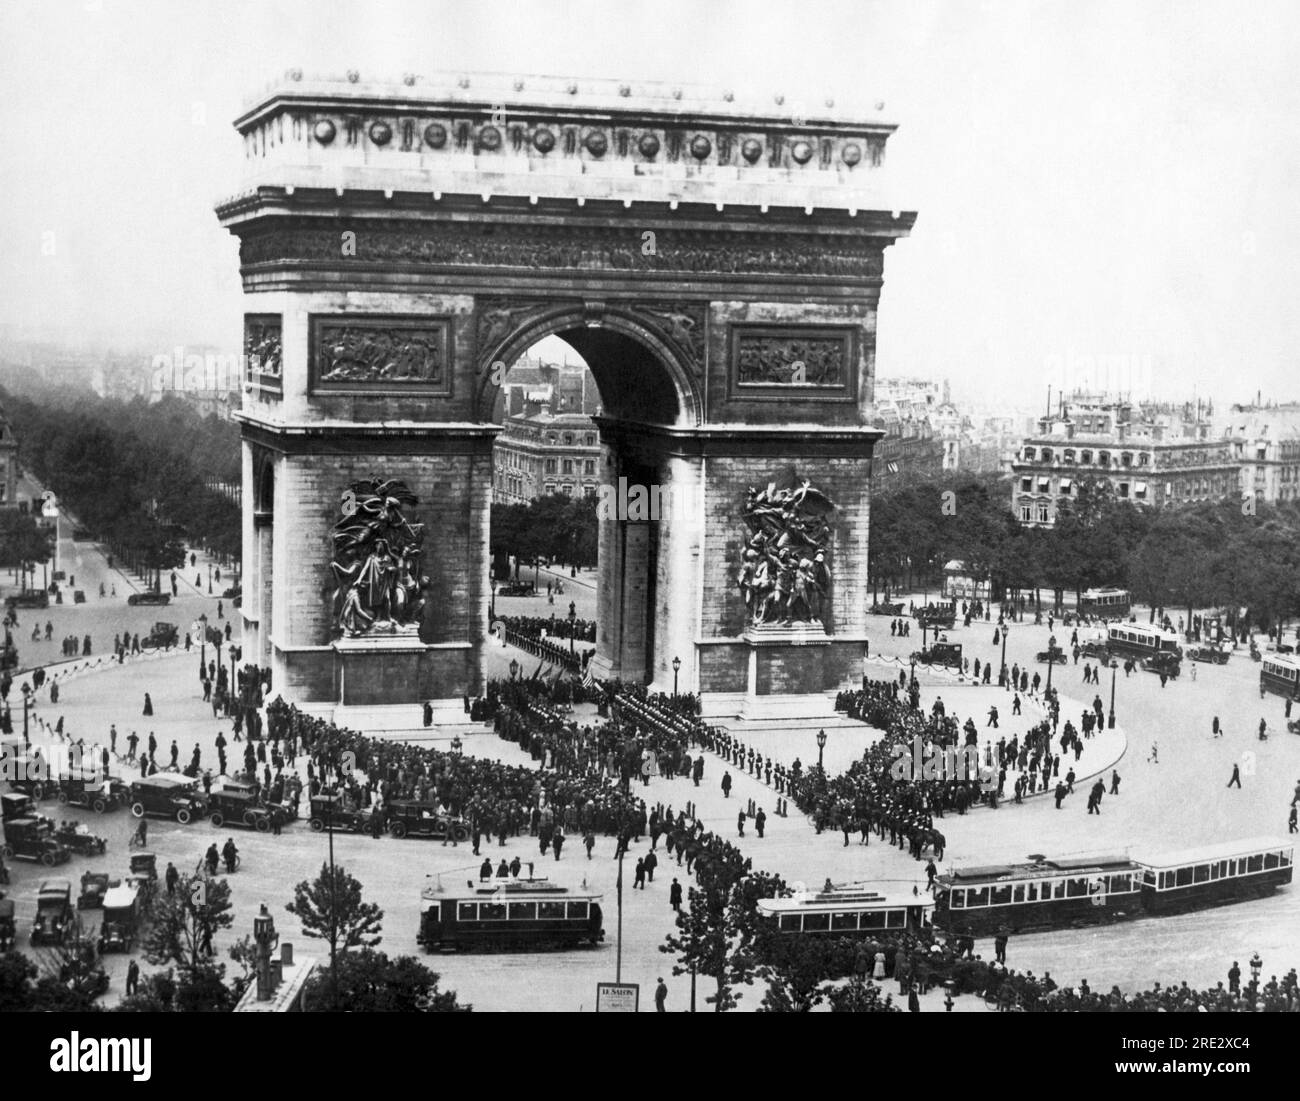 Paris, France:  June 9, 1923 Memorial Day at the Arc de Triomphe de l'Etoile at the western end of the Champs-Elysees in Paris. It honors those who fought for France. Stock Photo